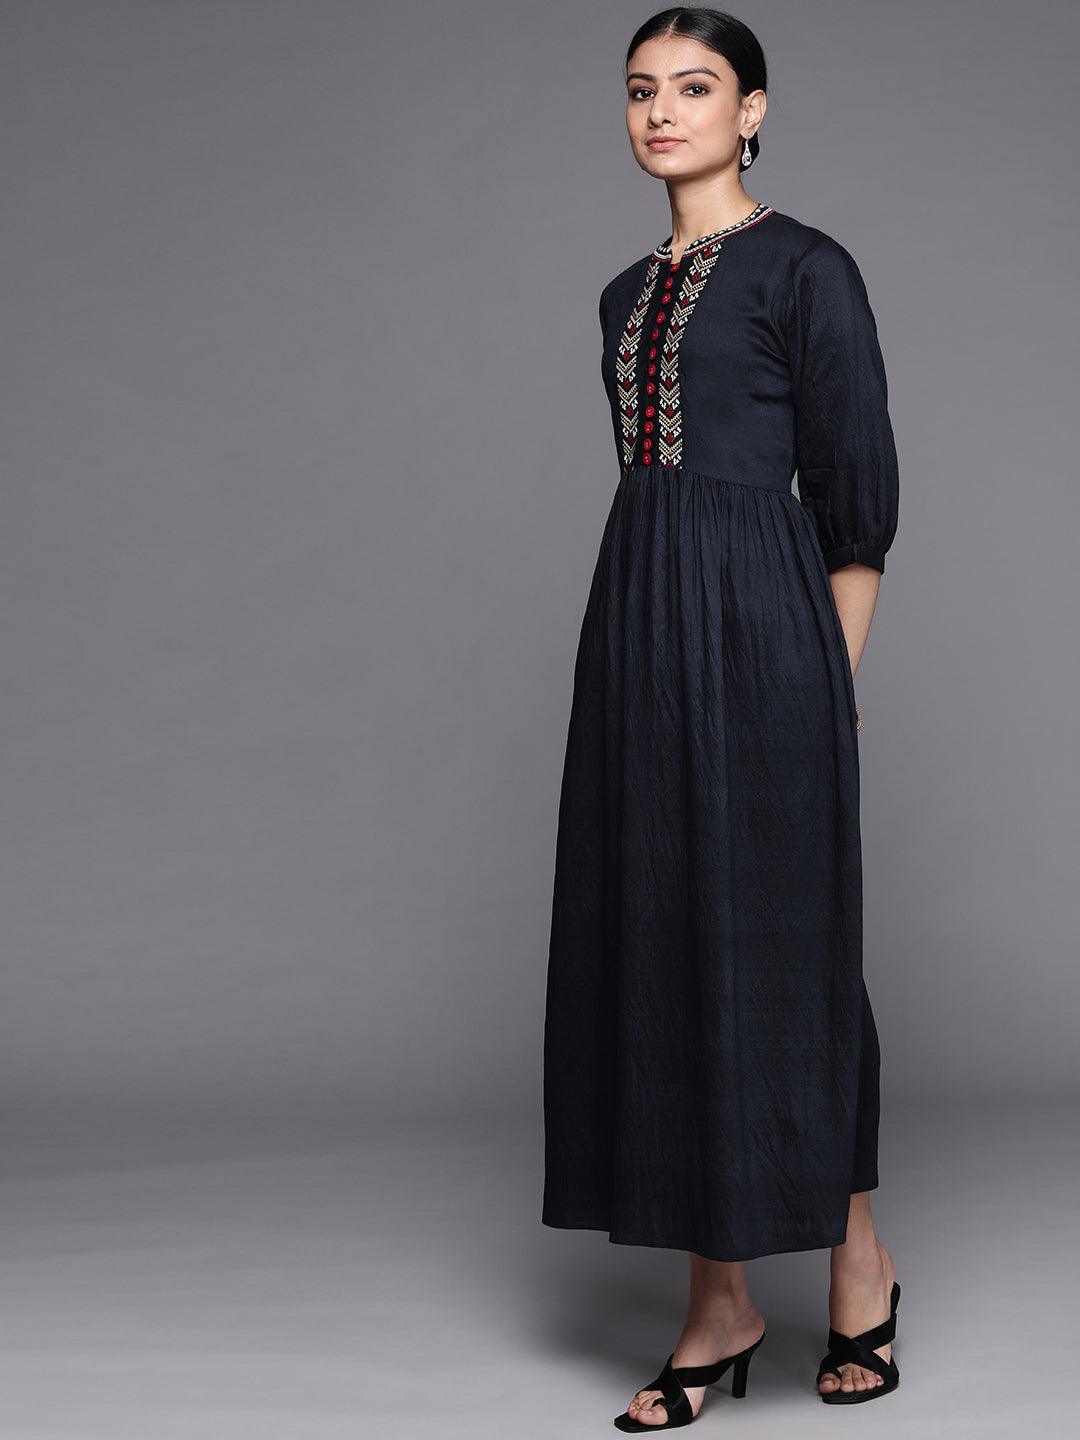 Navy Blue Embroidered Viscose Rayon Dress